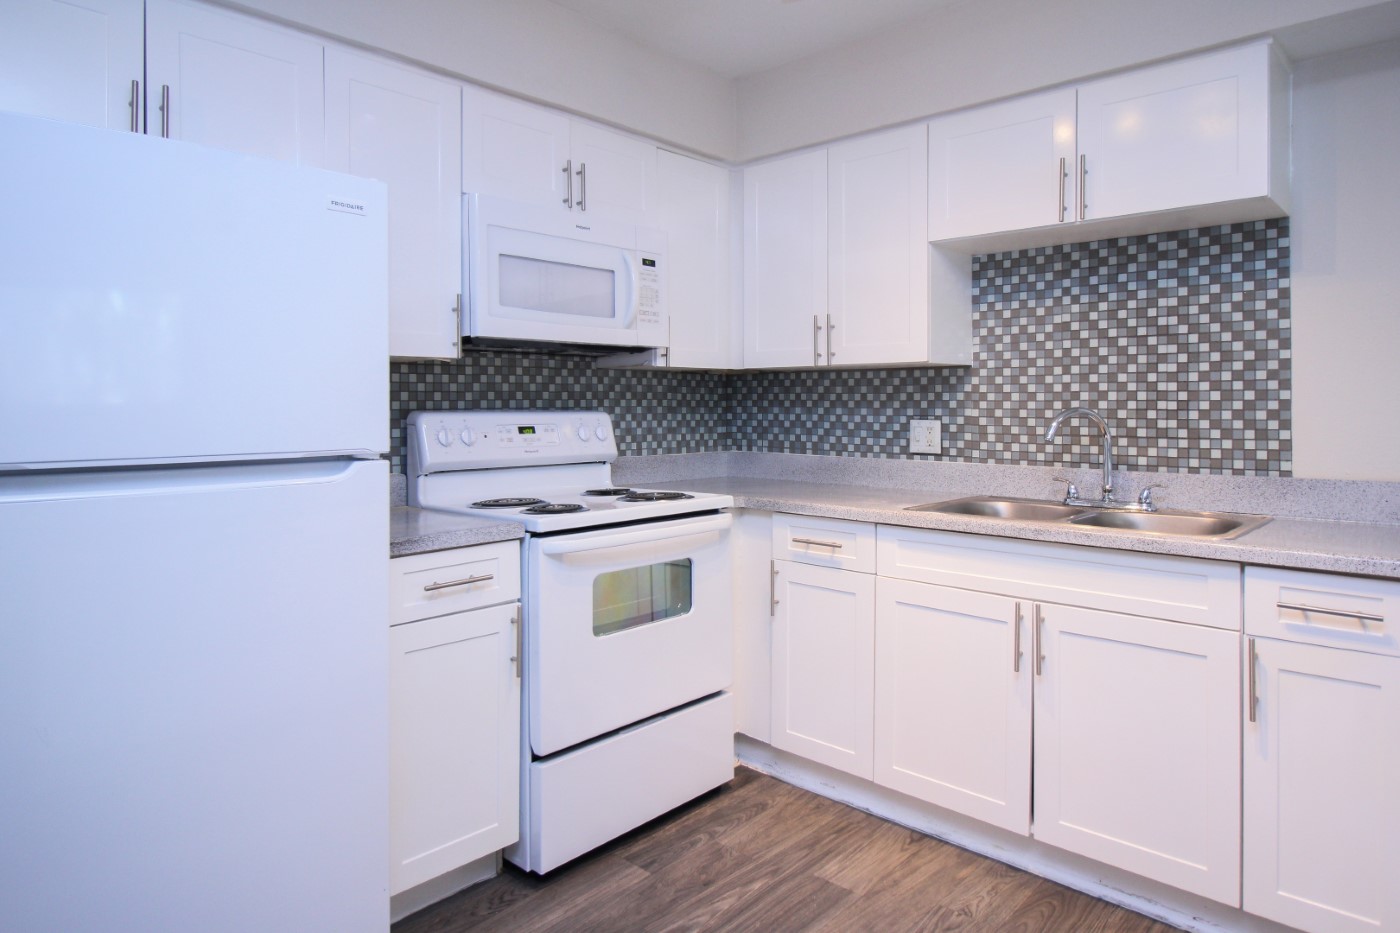 Apartment Amenities - Fully Equipped Kitchen